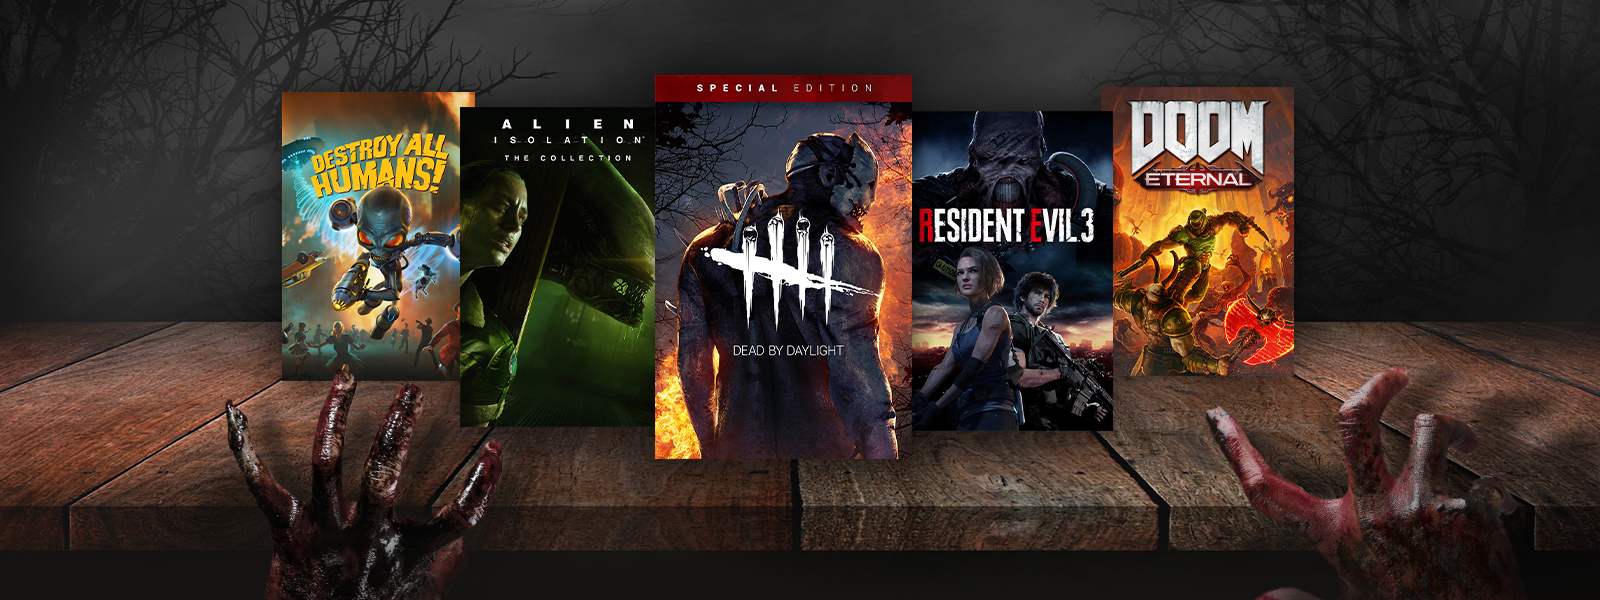 upcoming xbox store sales